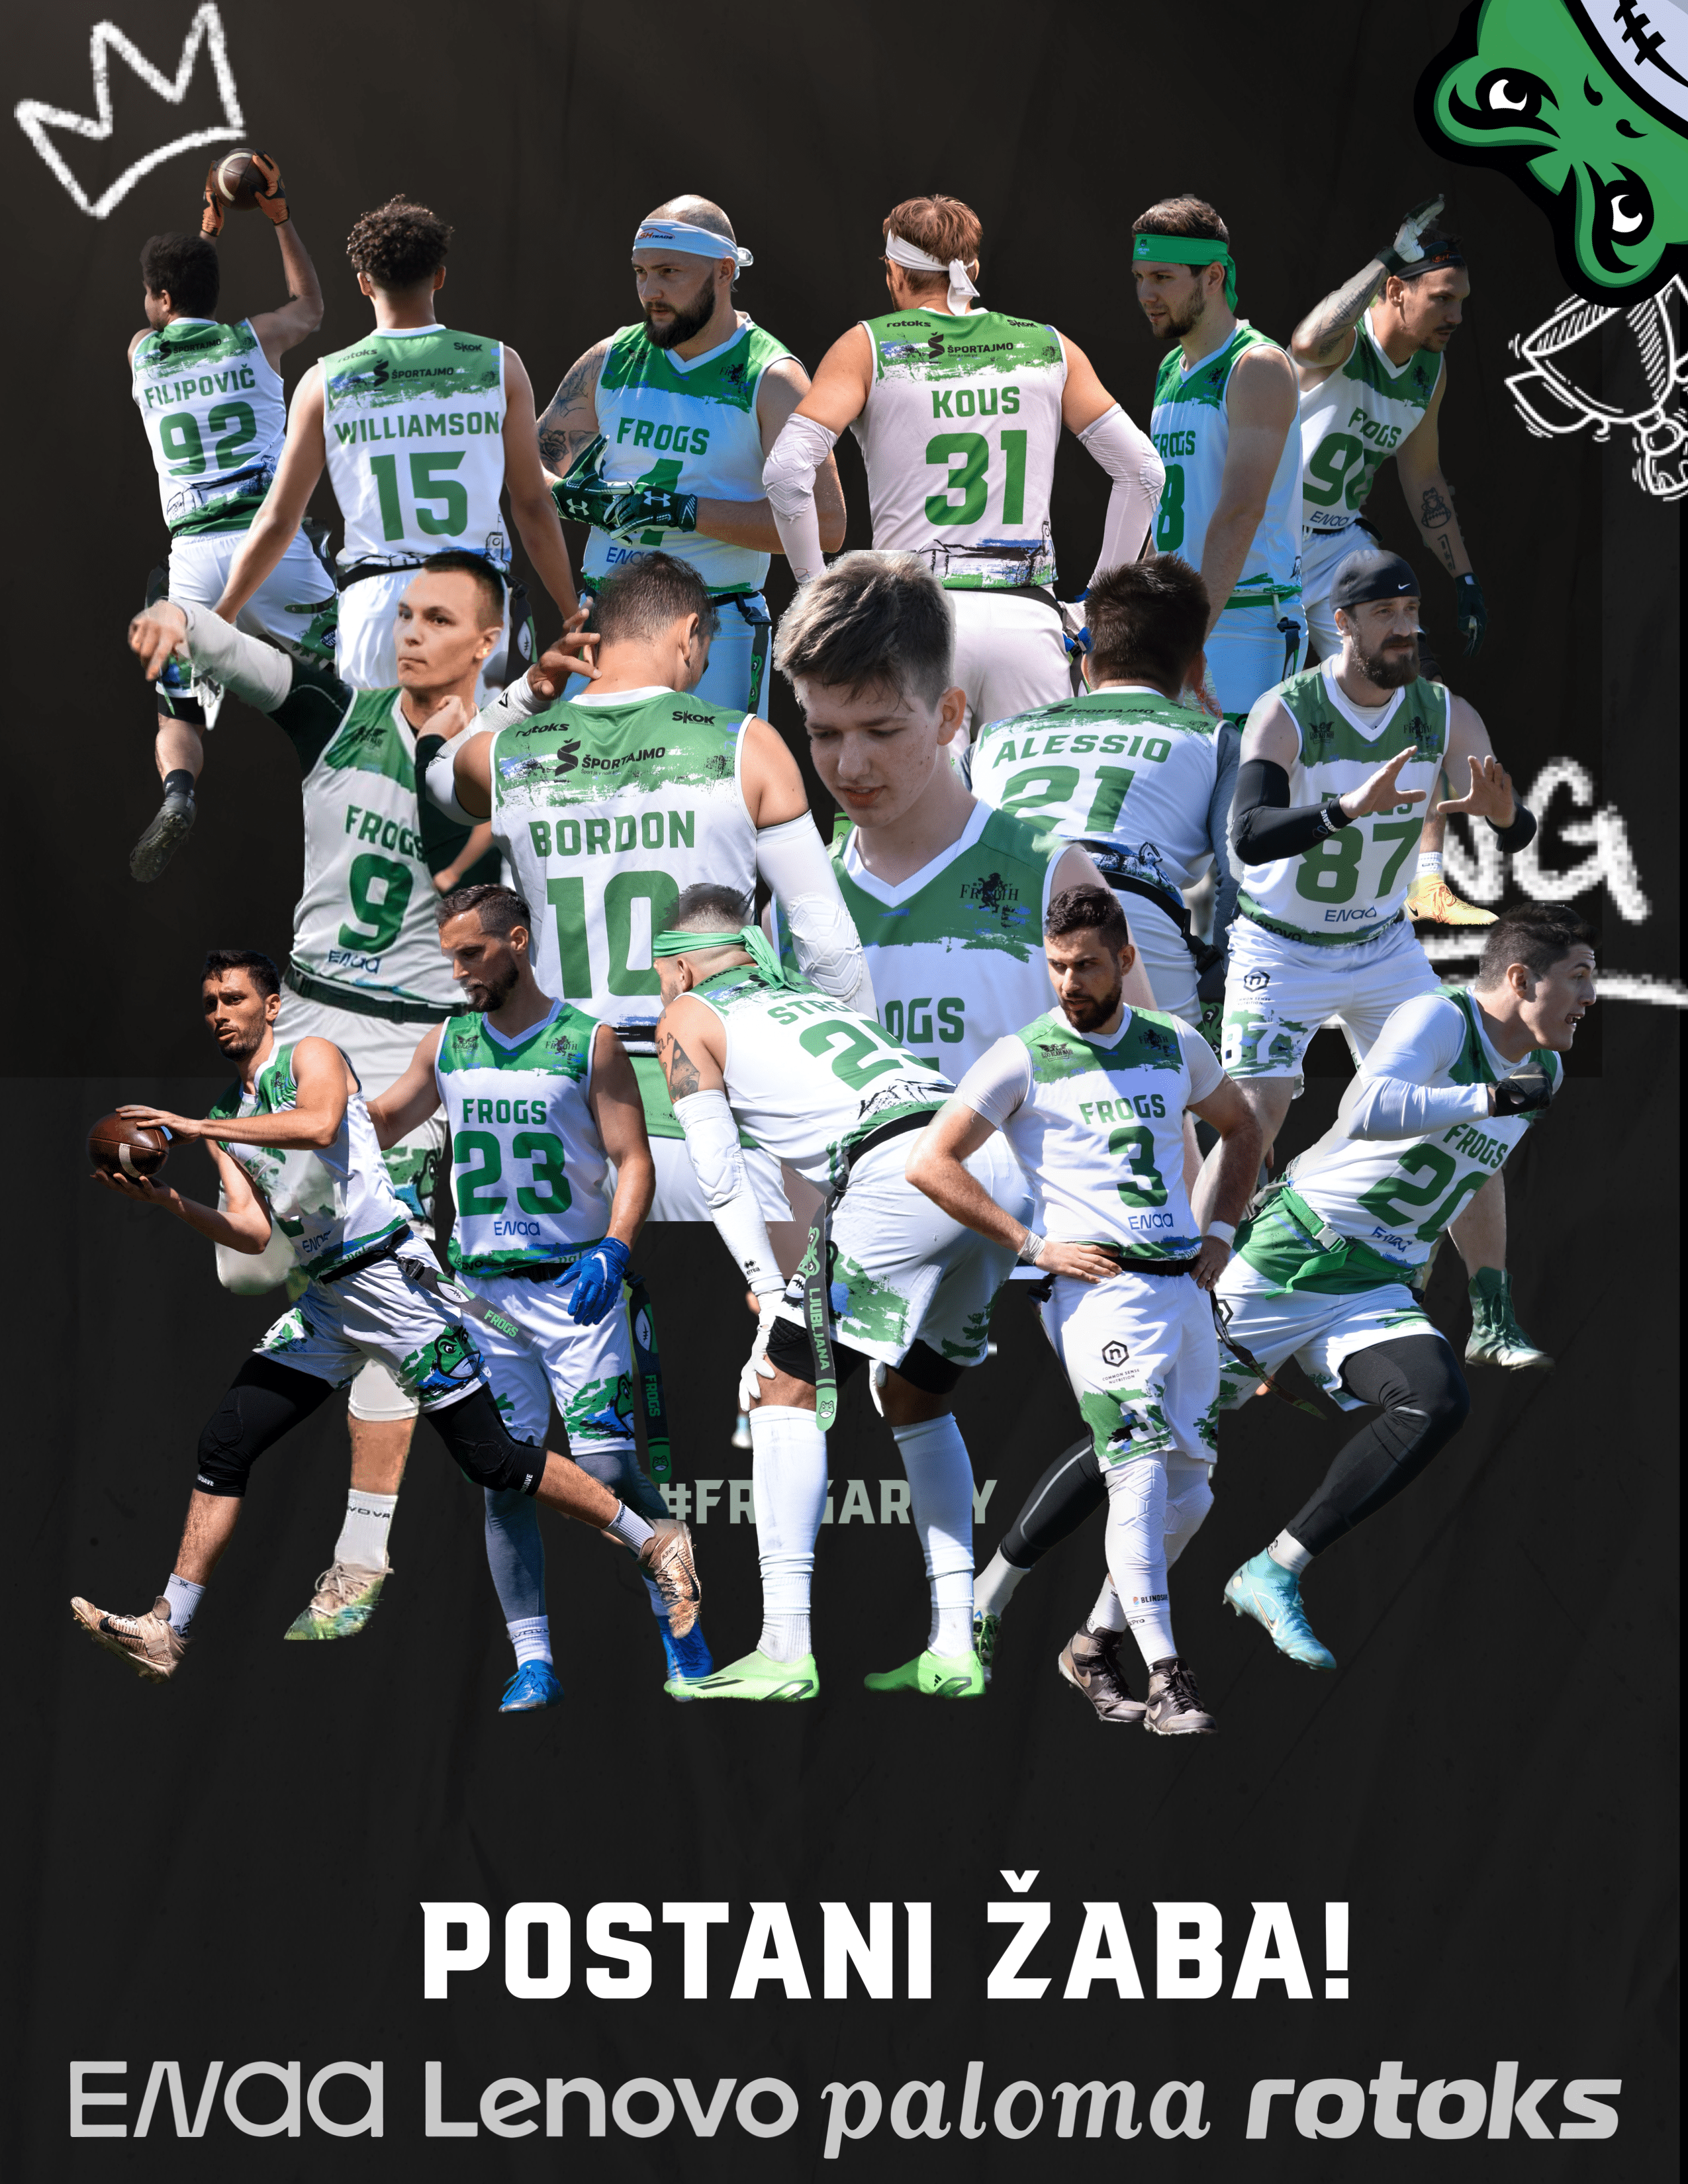 Join #FrogArmy: Become a Non-Contact American Football Champion with Ljubljana Frogs